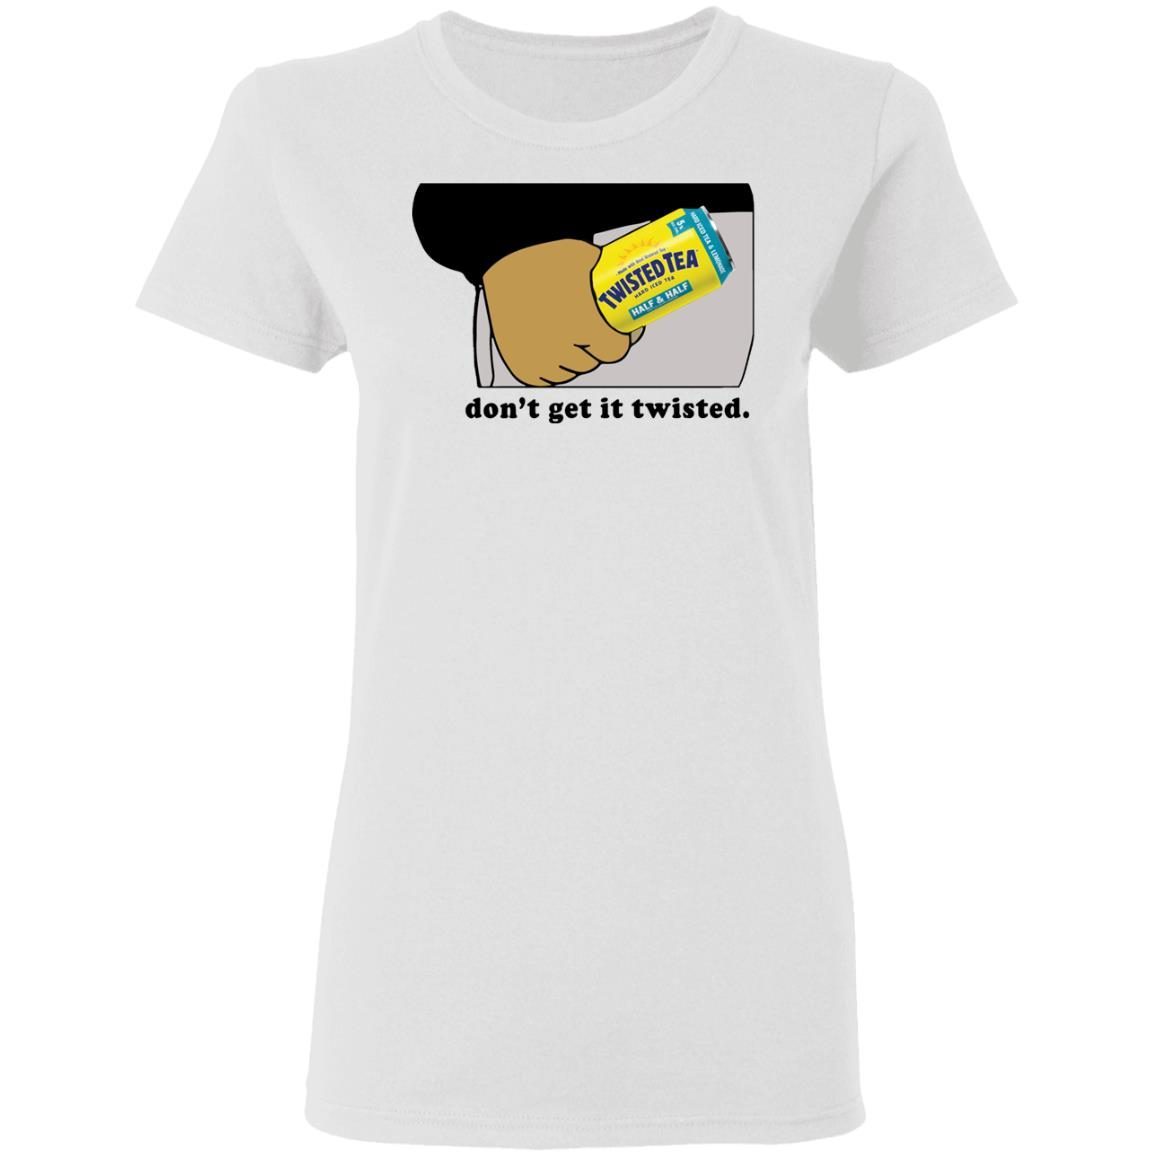 Twisted tea don’t get it twisted shirt